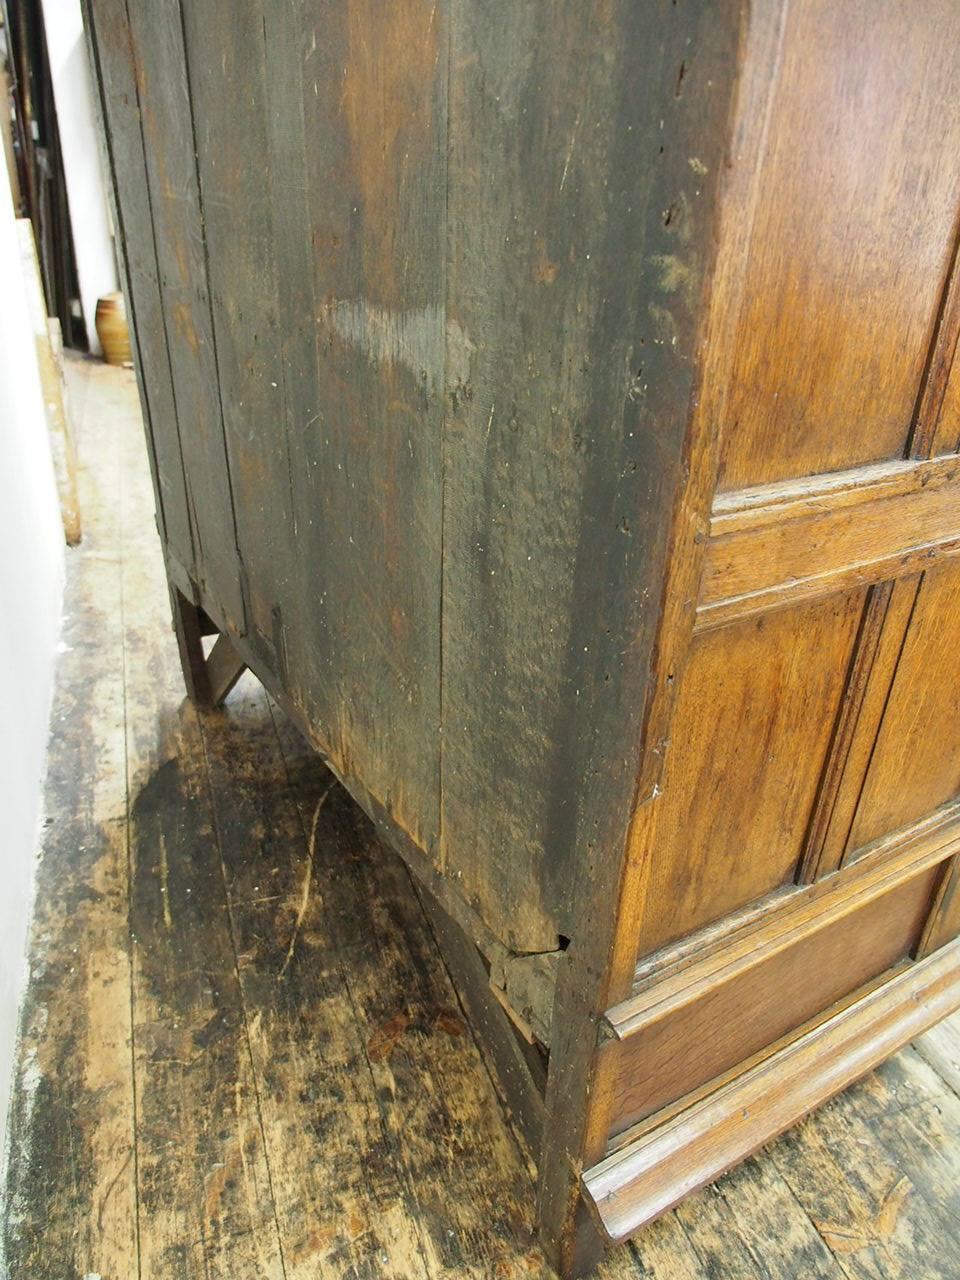 Impressive Dutch oak armoire or cabinet, circa late 1600s. The stepped cornice has rosewood and ebony inlay, ebony panels and three carved figureheads. There are two impressive panelled doors with central raised ebonized panels and three integral,